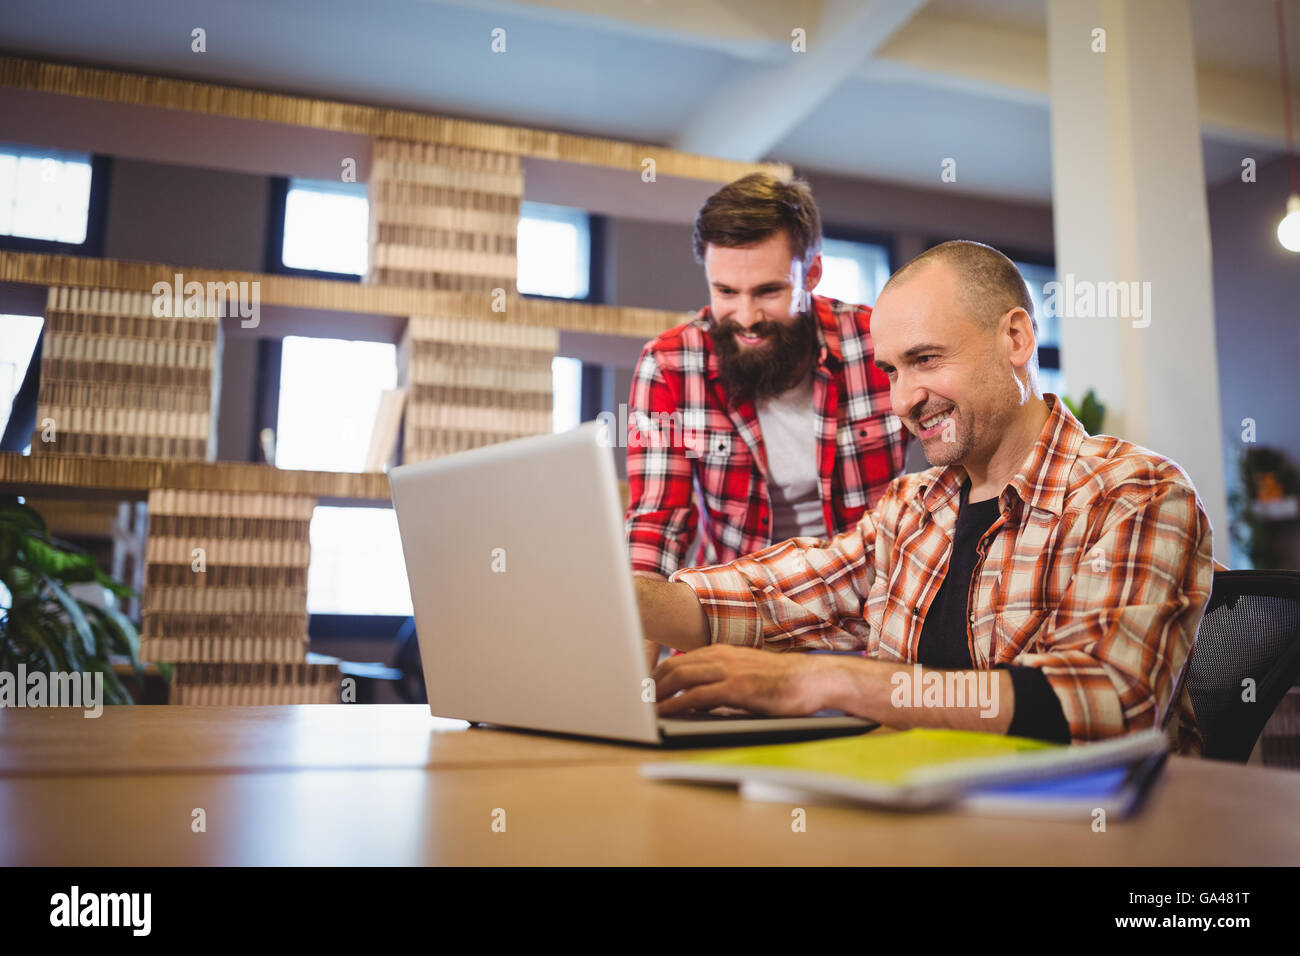 Male colleagues smiling while discussing over laptop Stock Photo